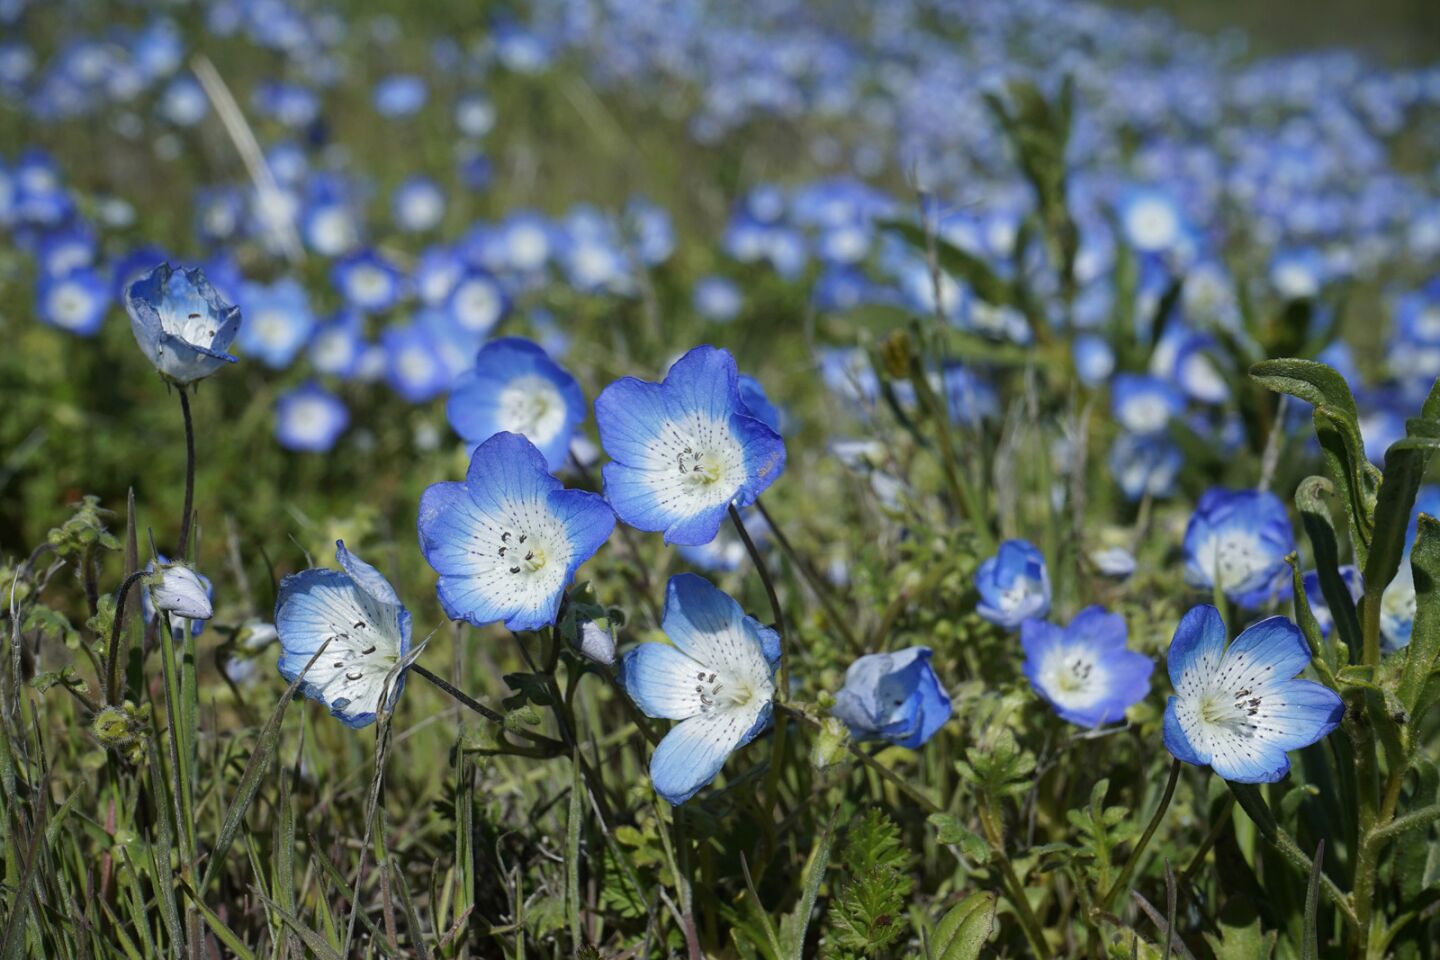 Wildflowers known as baby blue eyes are in abundance. They're among California's 7,000 species and varieties of native plants, according to the state Fish and Wildlife Department.